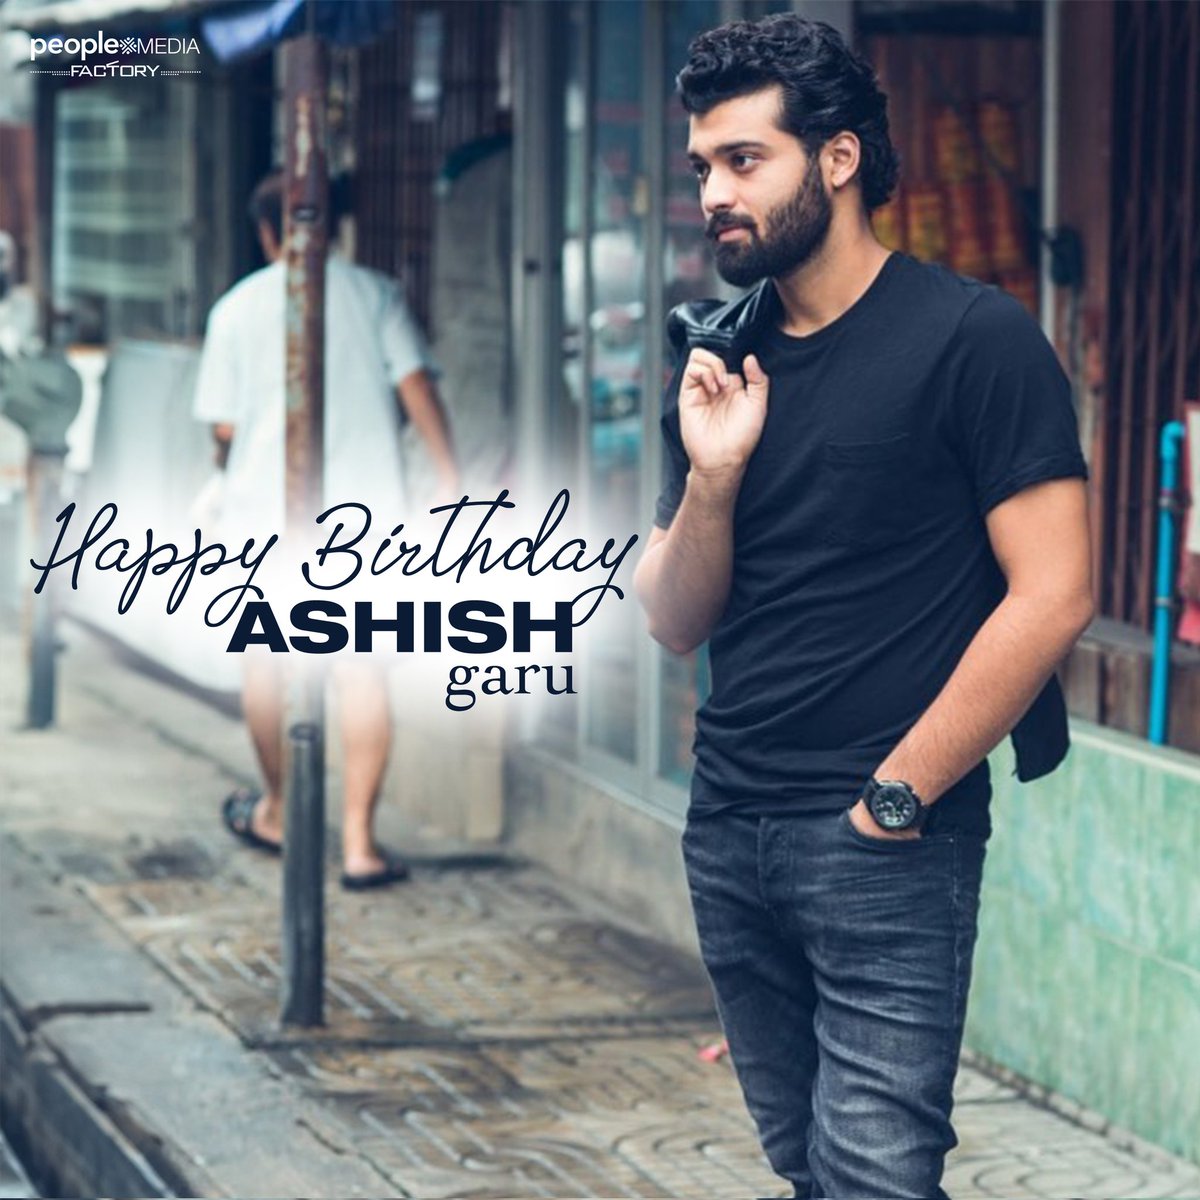 Wishing @AshishVoffl a very Happy Birthday, Wishing you a year filled with love, success and Happiness 💐💐 Our best wishes for the theatrical release of #LoveMe 🫶 #HappyBirthdayAshish #HBDAshish